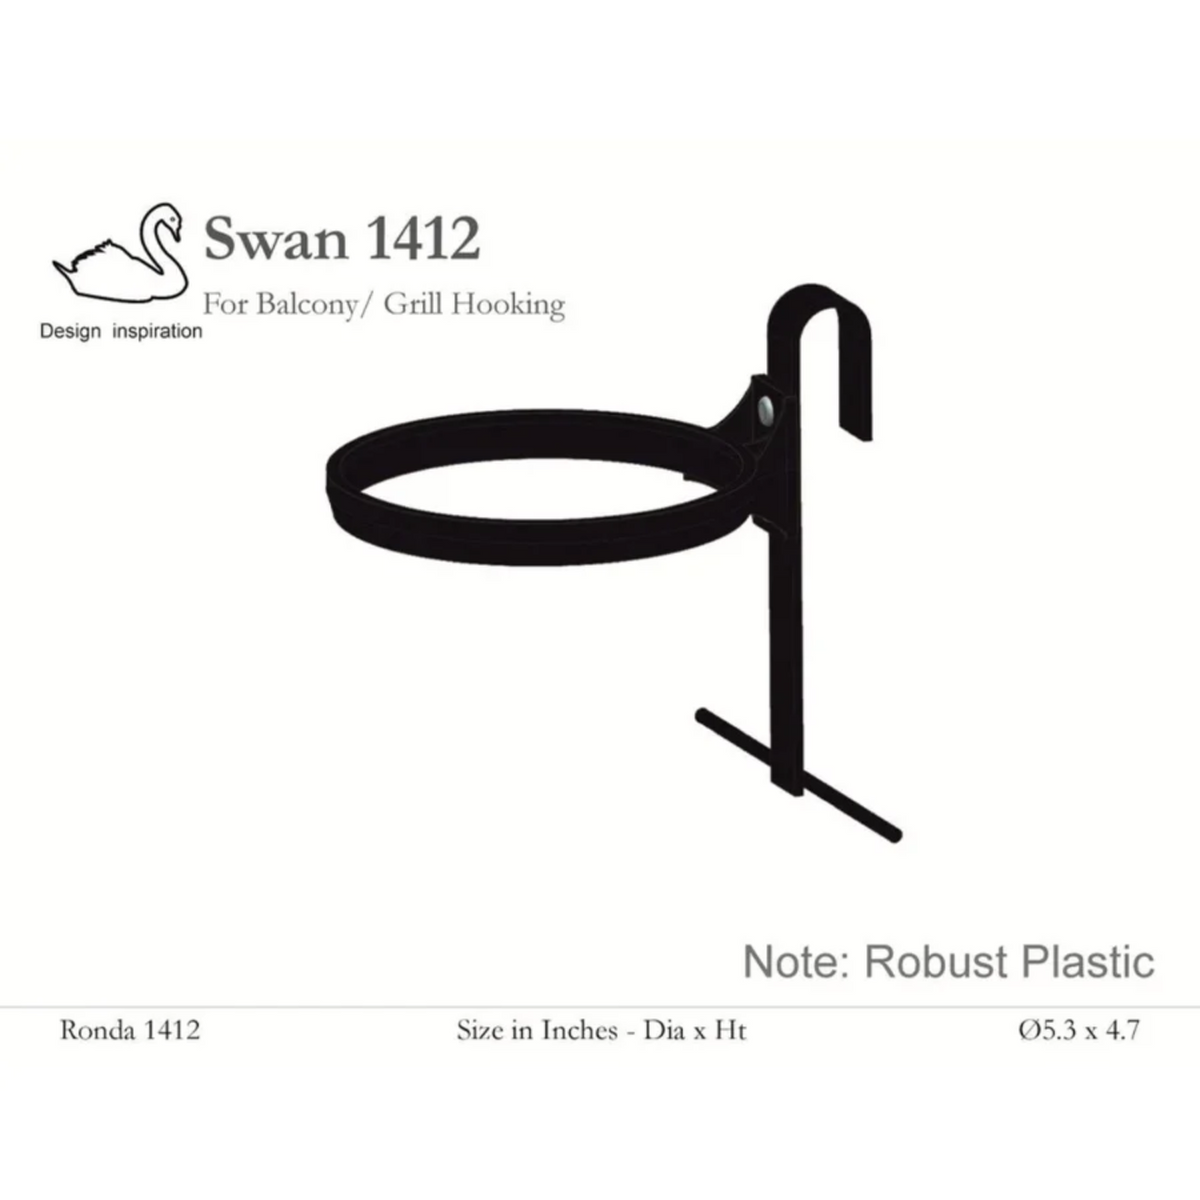 Swan Balcony/Grill Hooking For Ronda 1412